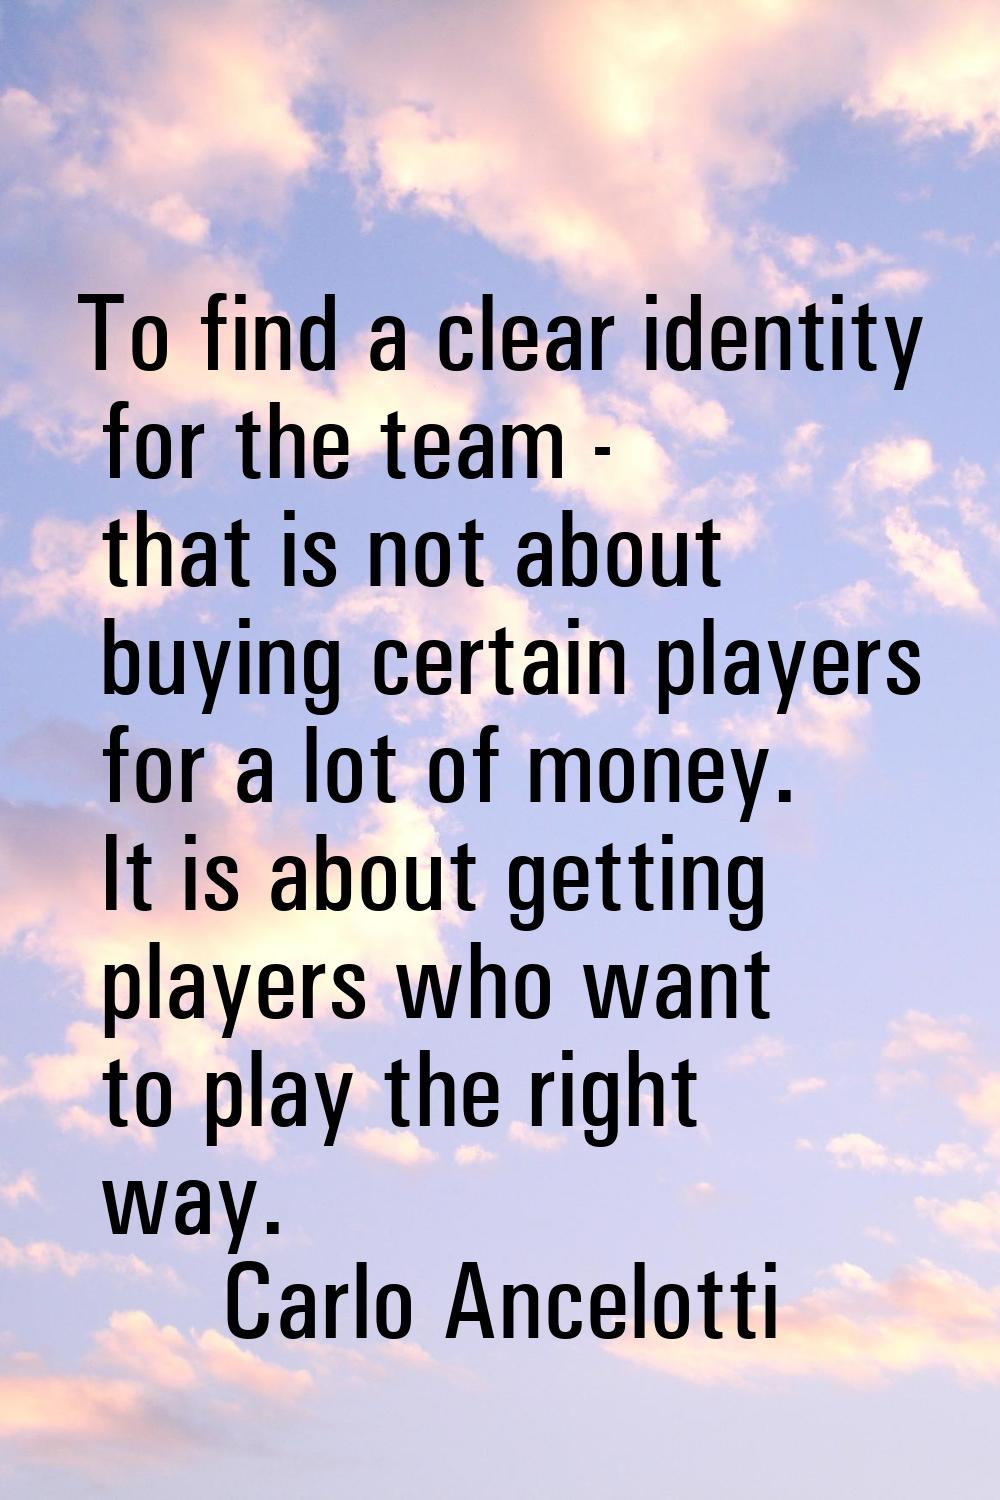 To find a clear identity for the team - that is not about buying certain players for a lot of money